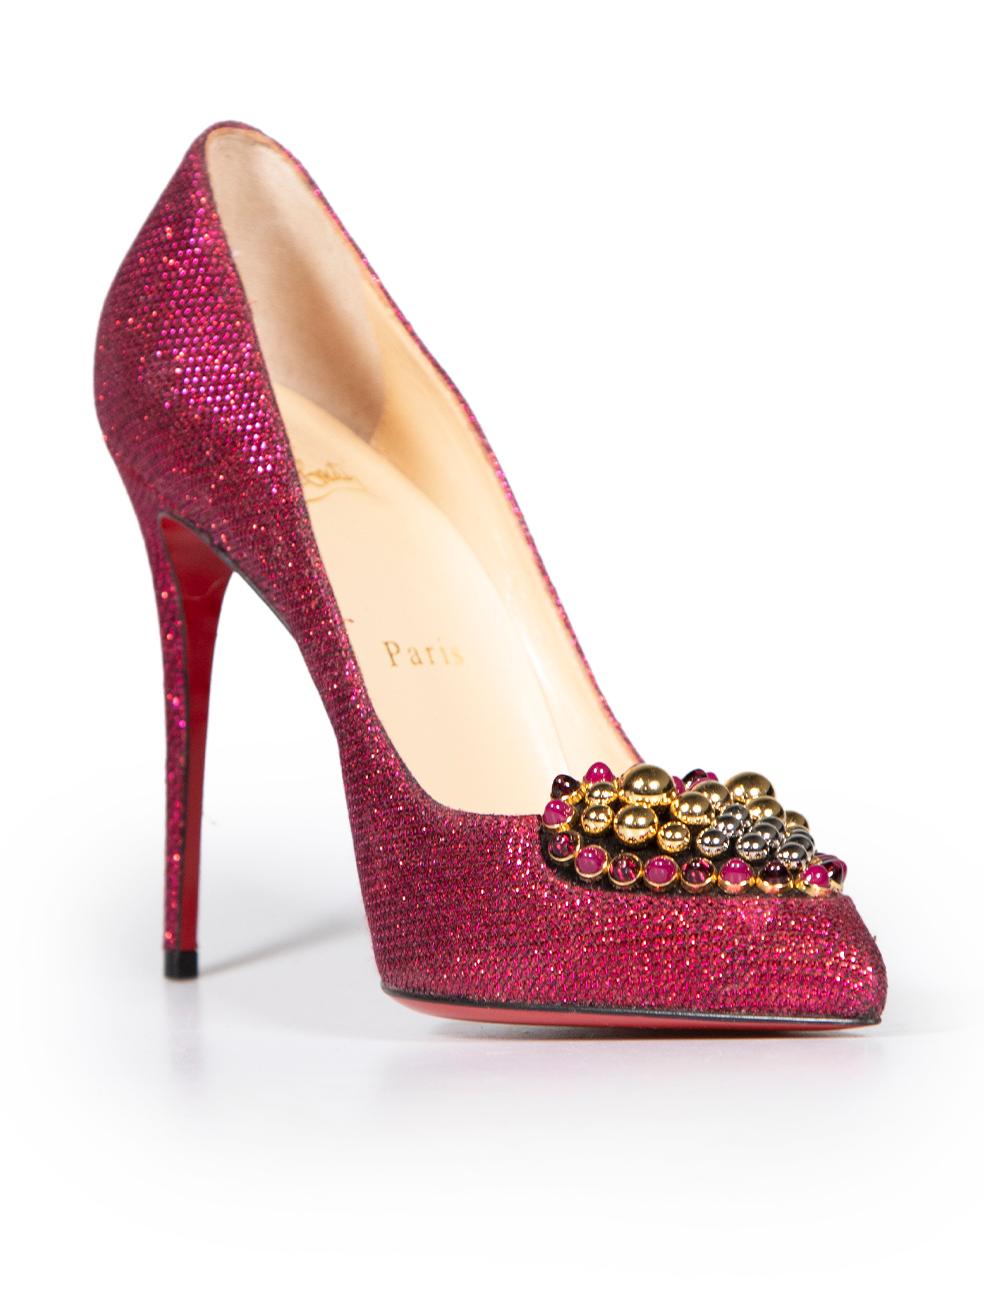 CONDITION is Very good. Hardly any visible wear to shoes is evident on this used Christian Louboutin designer resale item.
 
 
 
 Details
 
 
 Model: Coralta
 
 Pink
 
 Glitter
 
 Heels
 
 Point toe
 
 Slip on
 
 Heart studded detail
 
 Signature